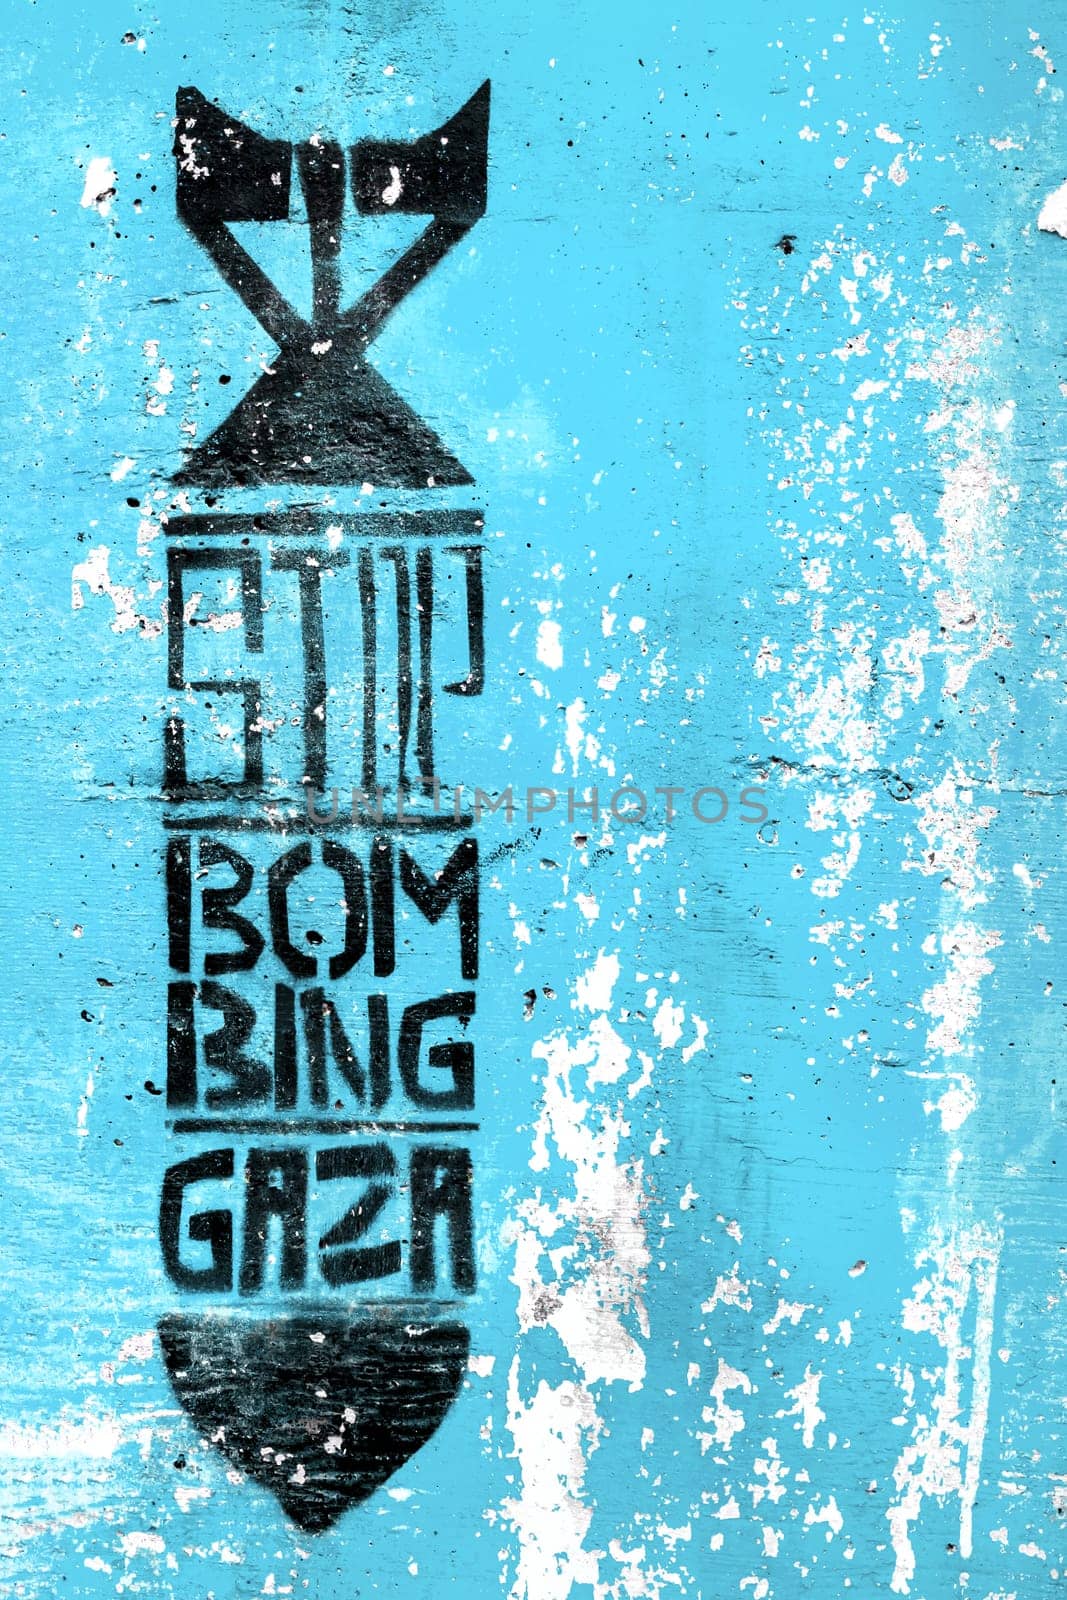 Graffiti on the vintage blue wall depicting the silhouette of a bomb. Inside message: STOP BOMBING GAZA. Copy space. Fully editable.